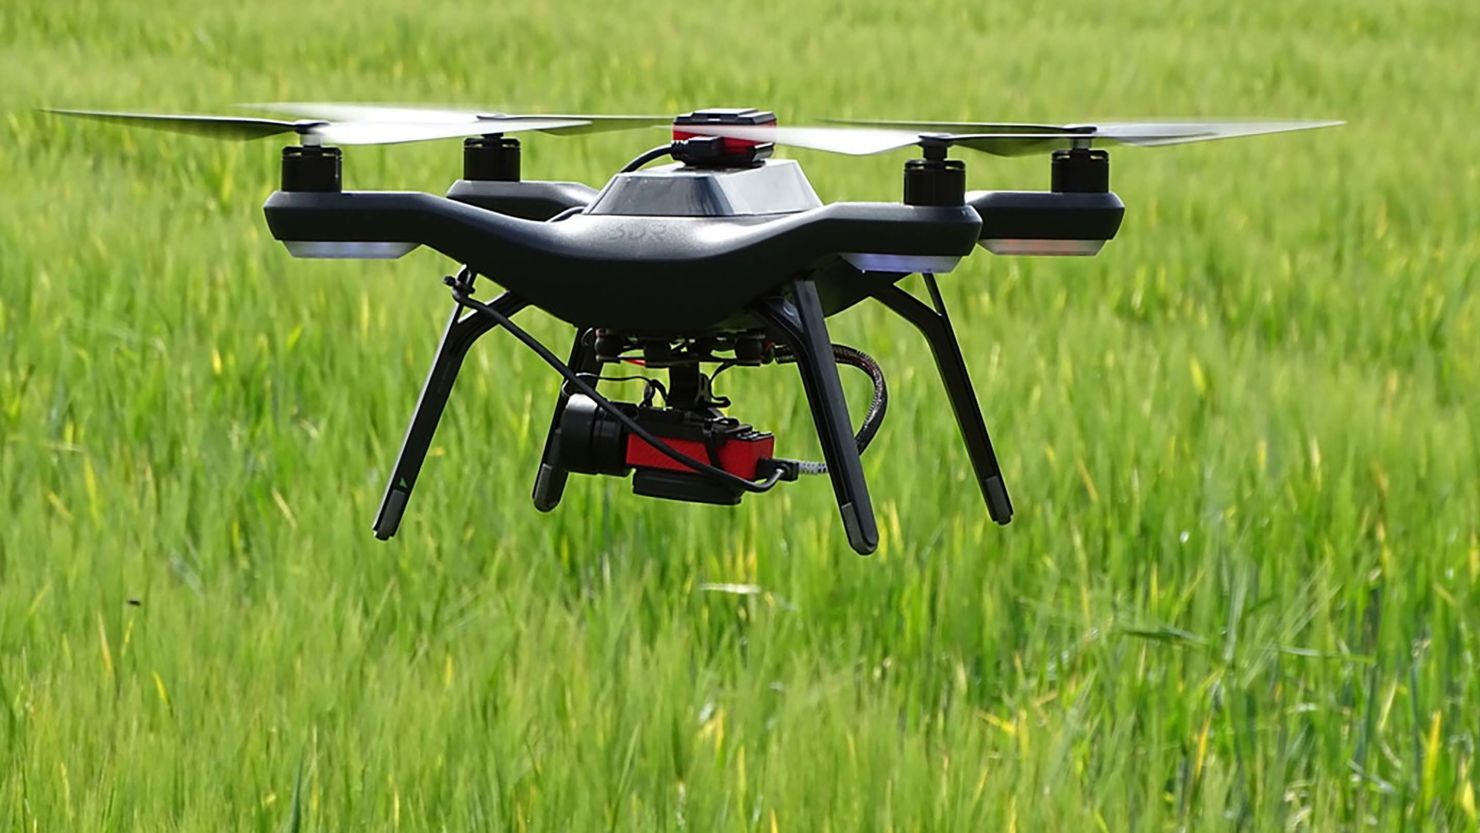 A drone equipped with a multispectral sensor was used for collecting data on crop growth.